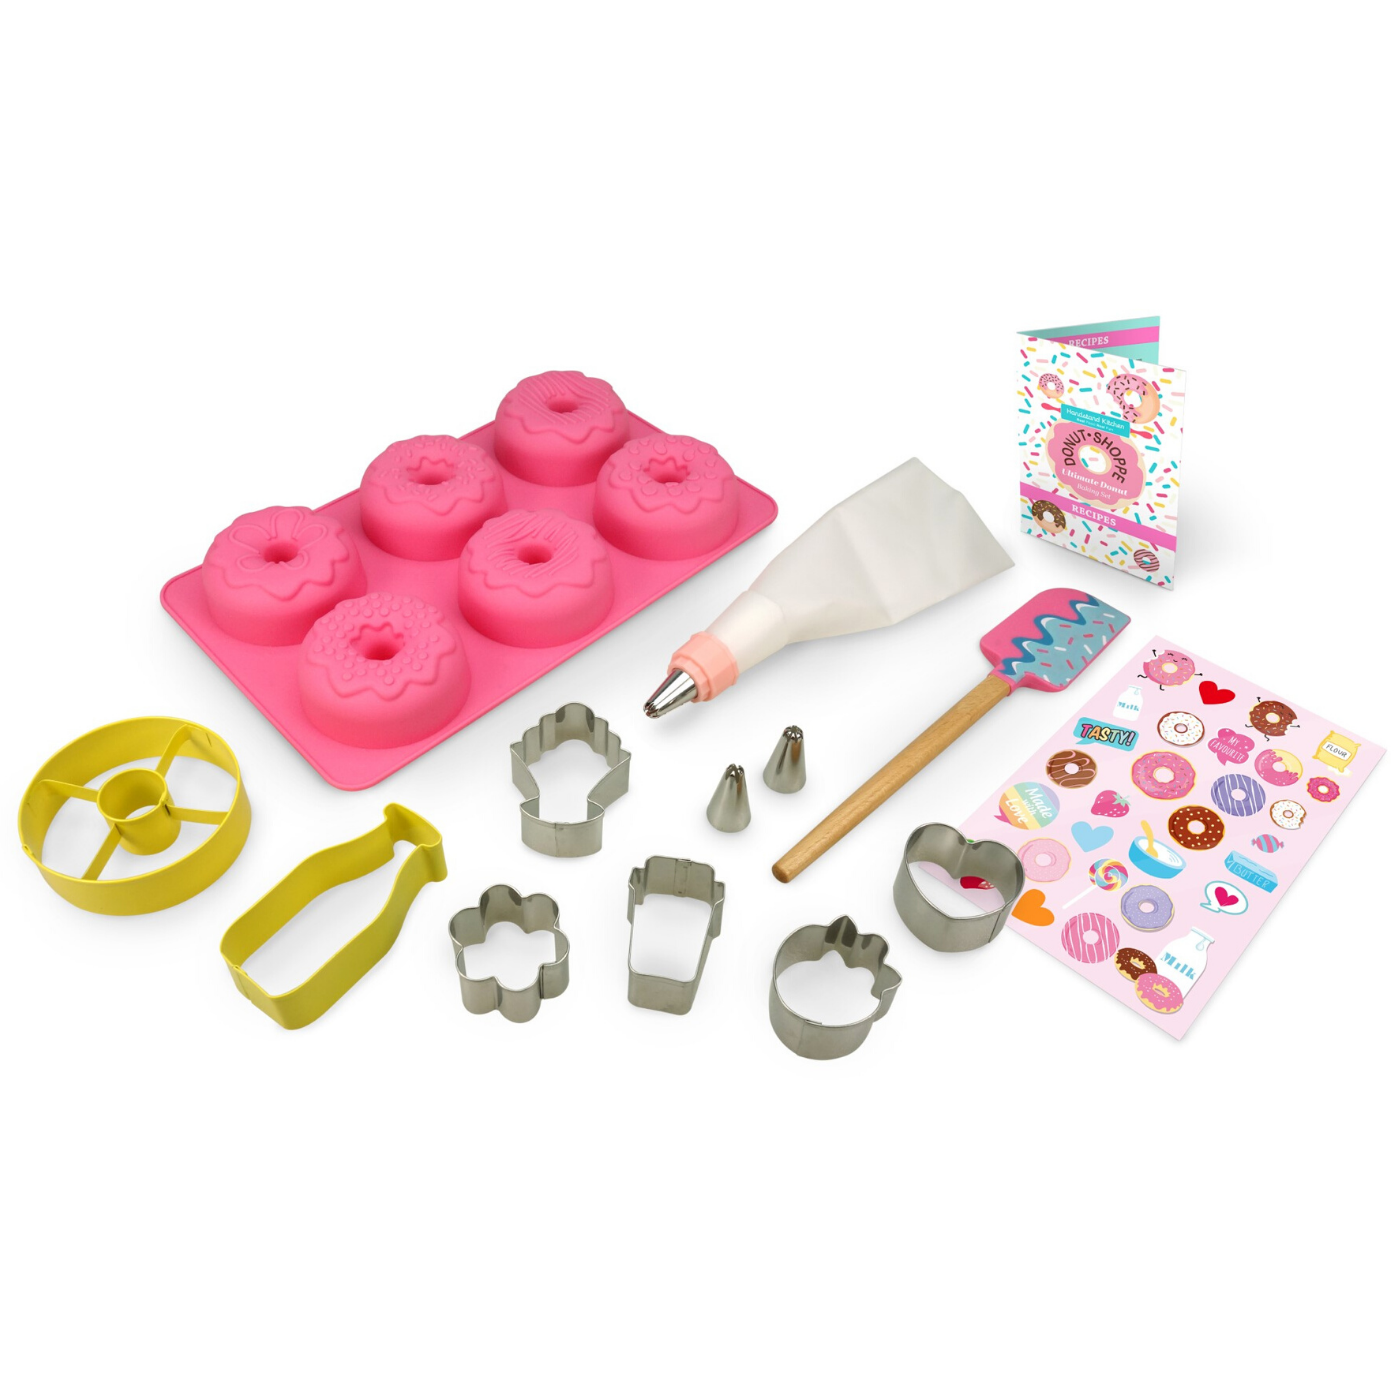 Hello Kitty Holiday Ultimate Baking Party Set